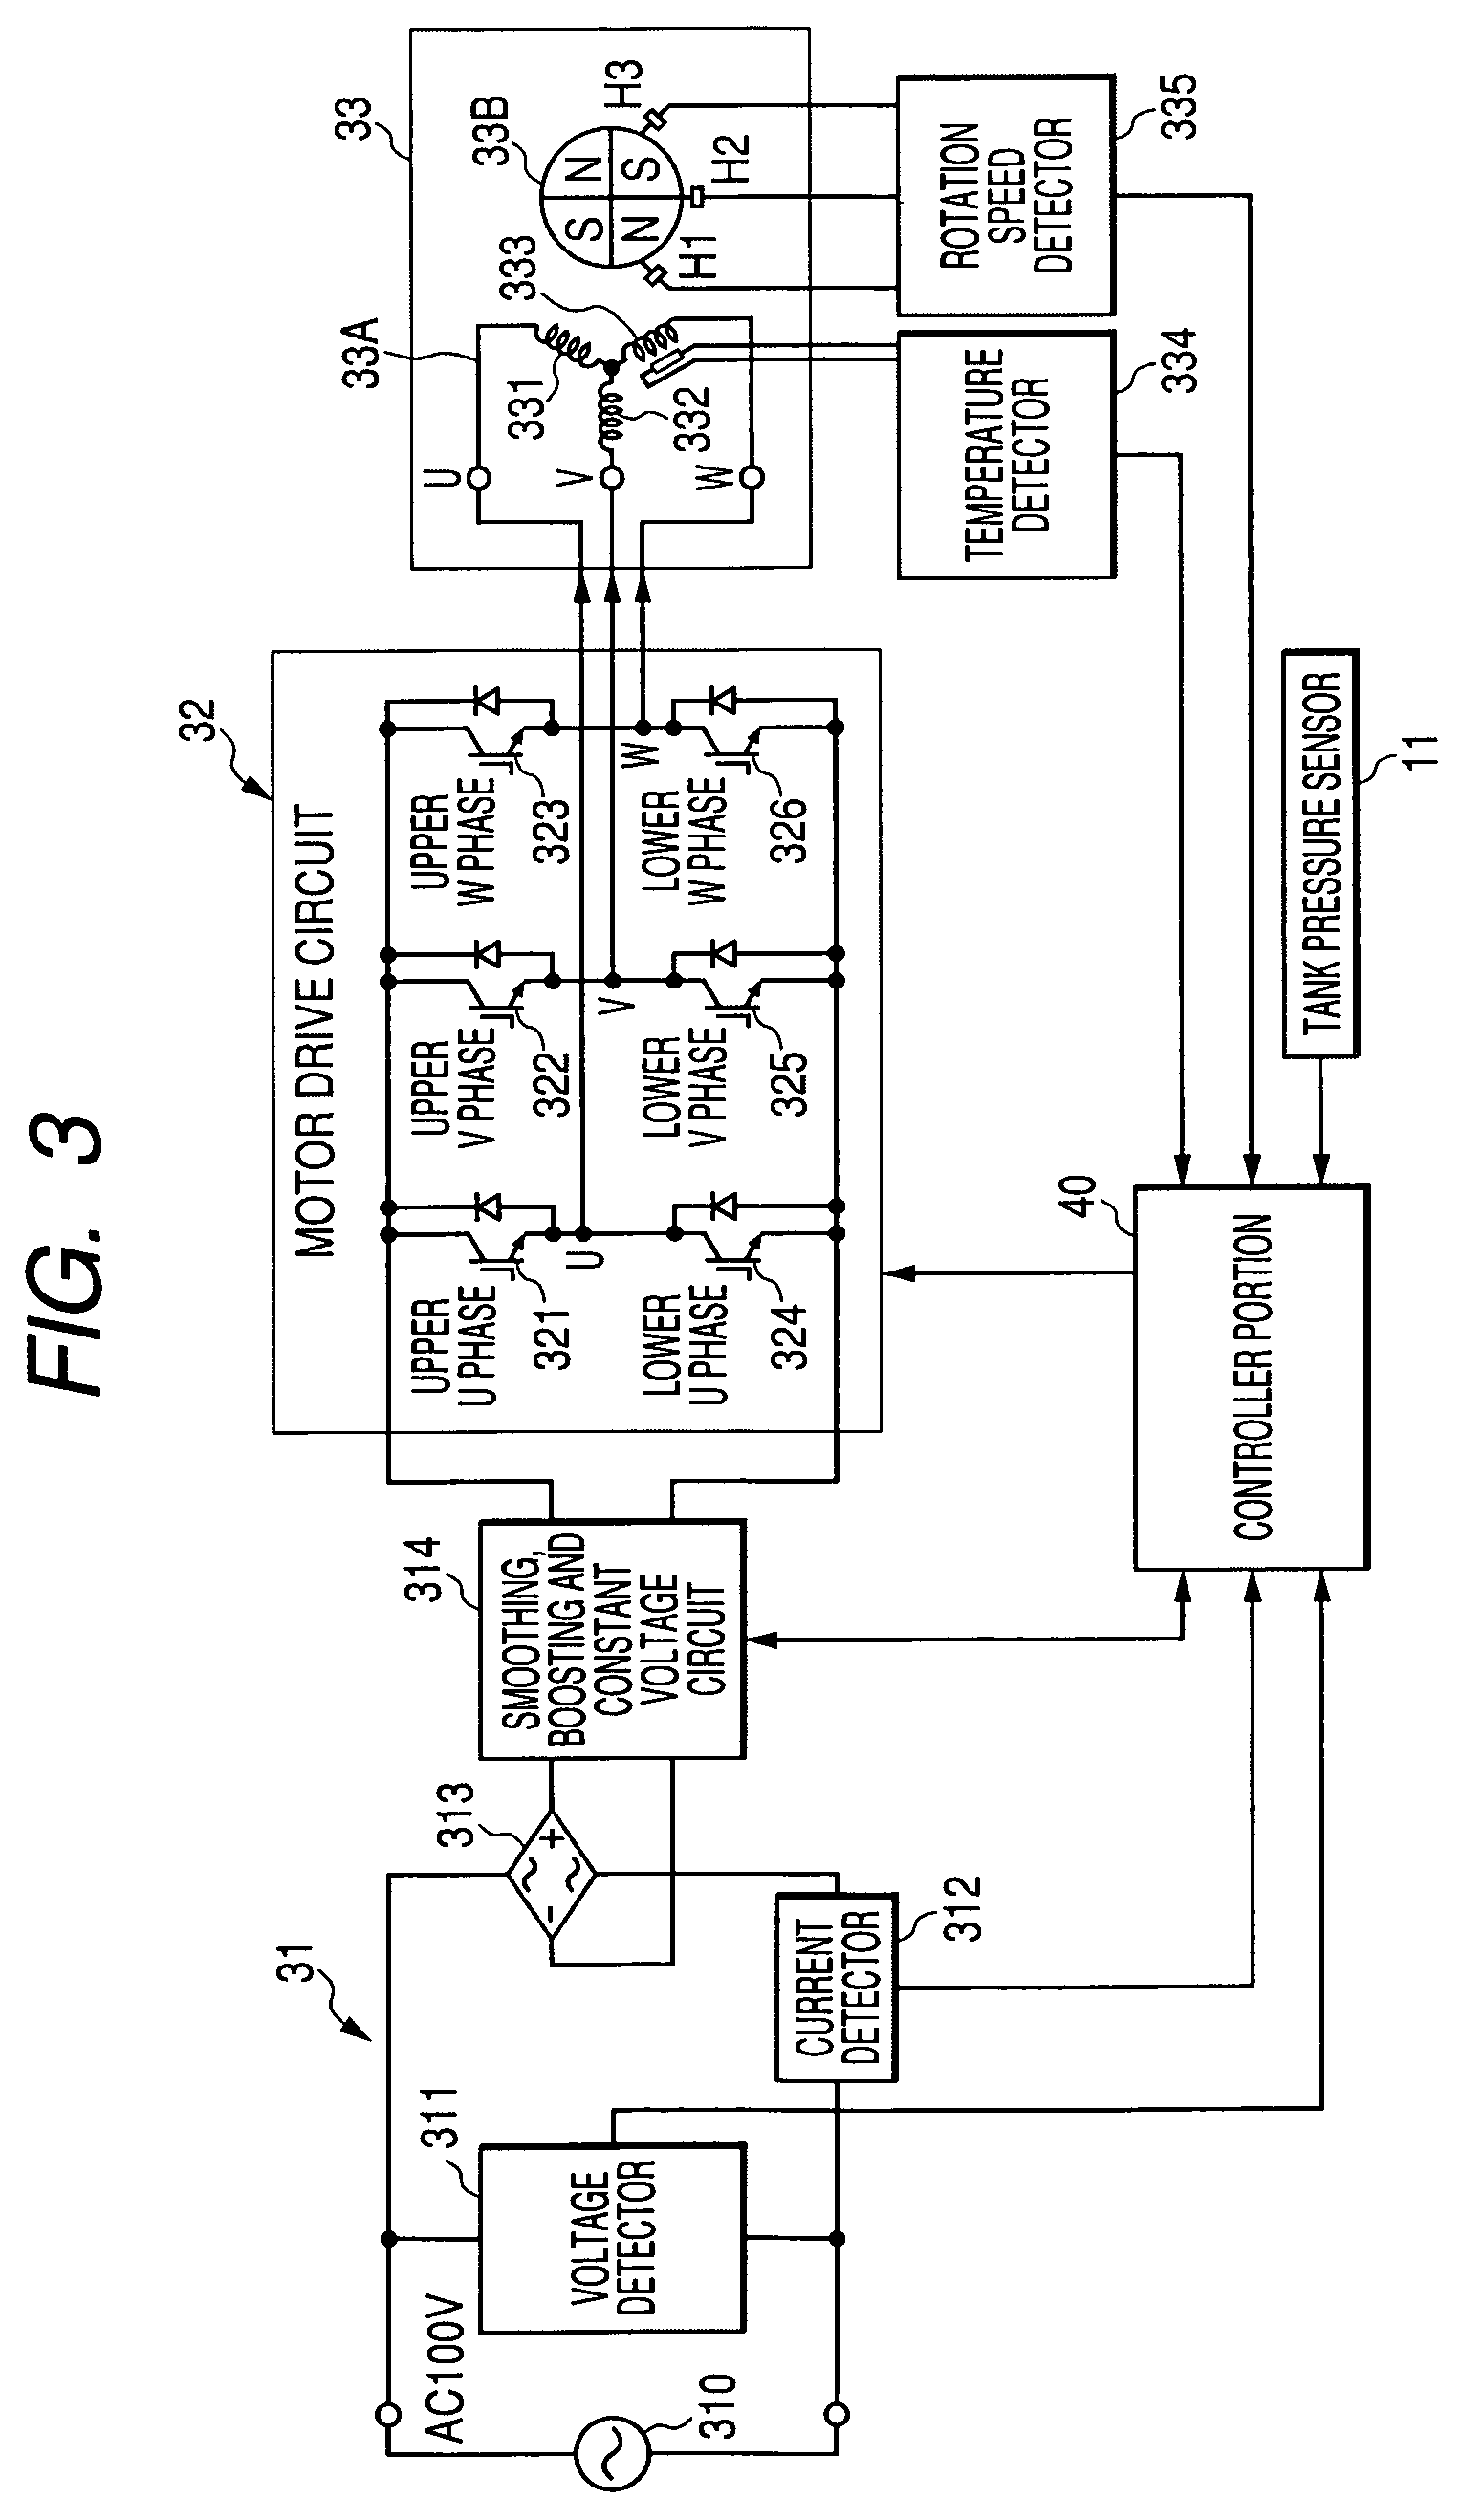 Air compressor having a controller for a variable speed motor and a compressed air tank